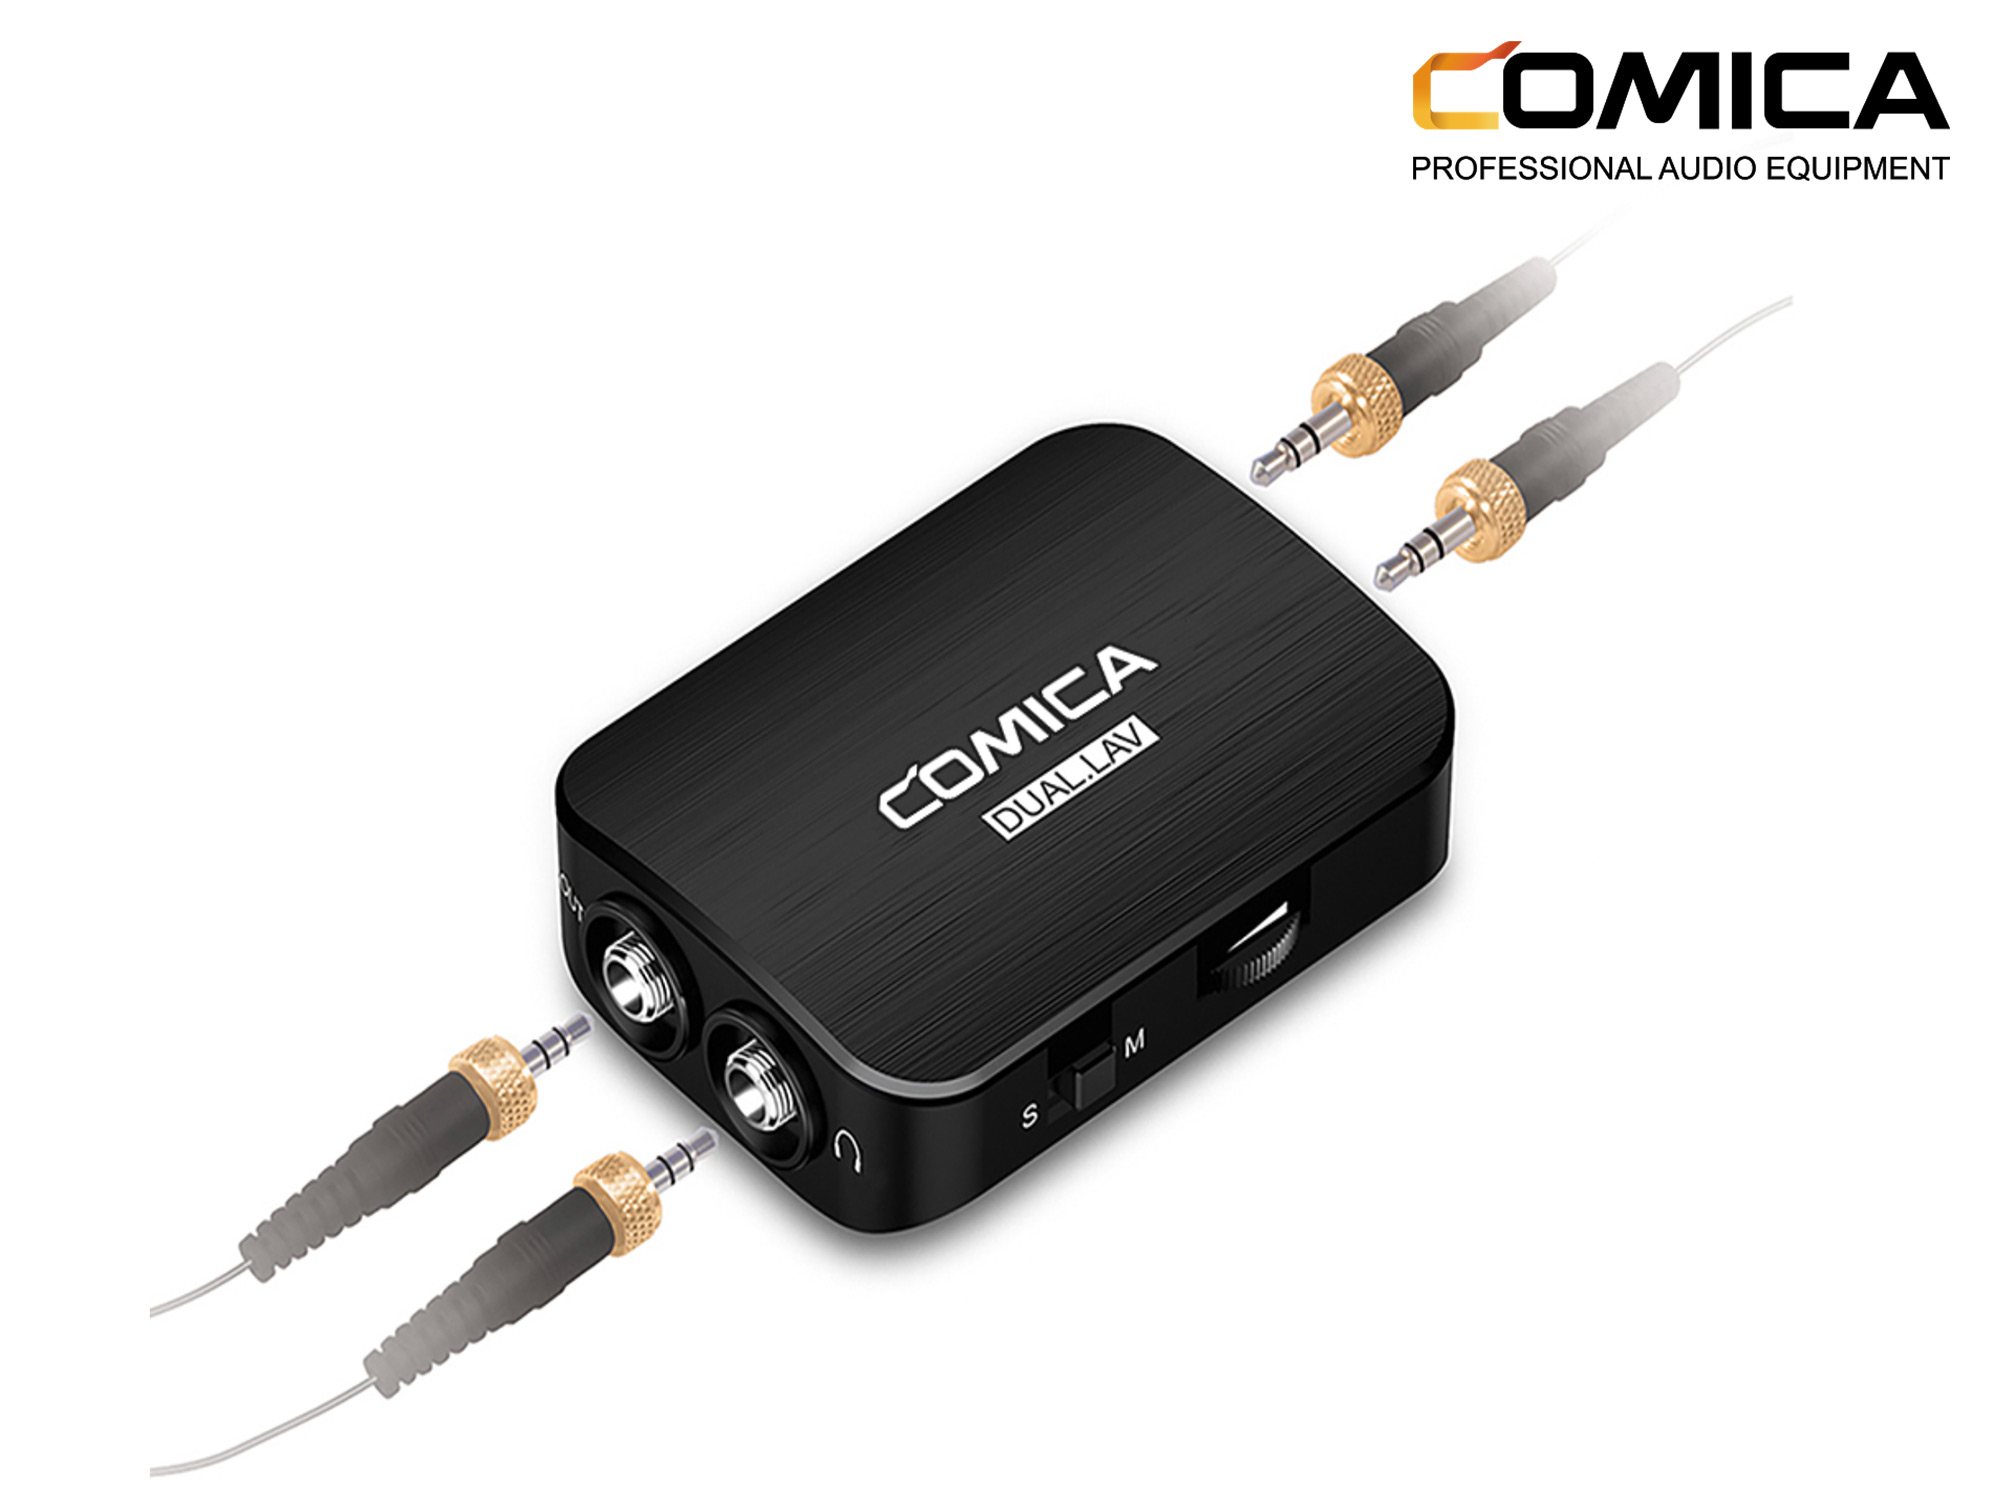 Comica Audio Omnidirectional Dual Lavalier Microphone Kit for DSLR and Smartphones